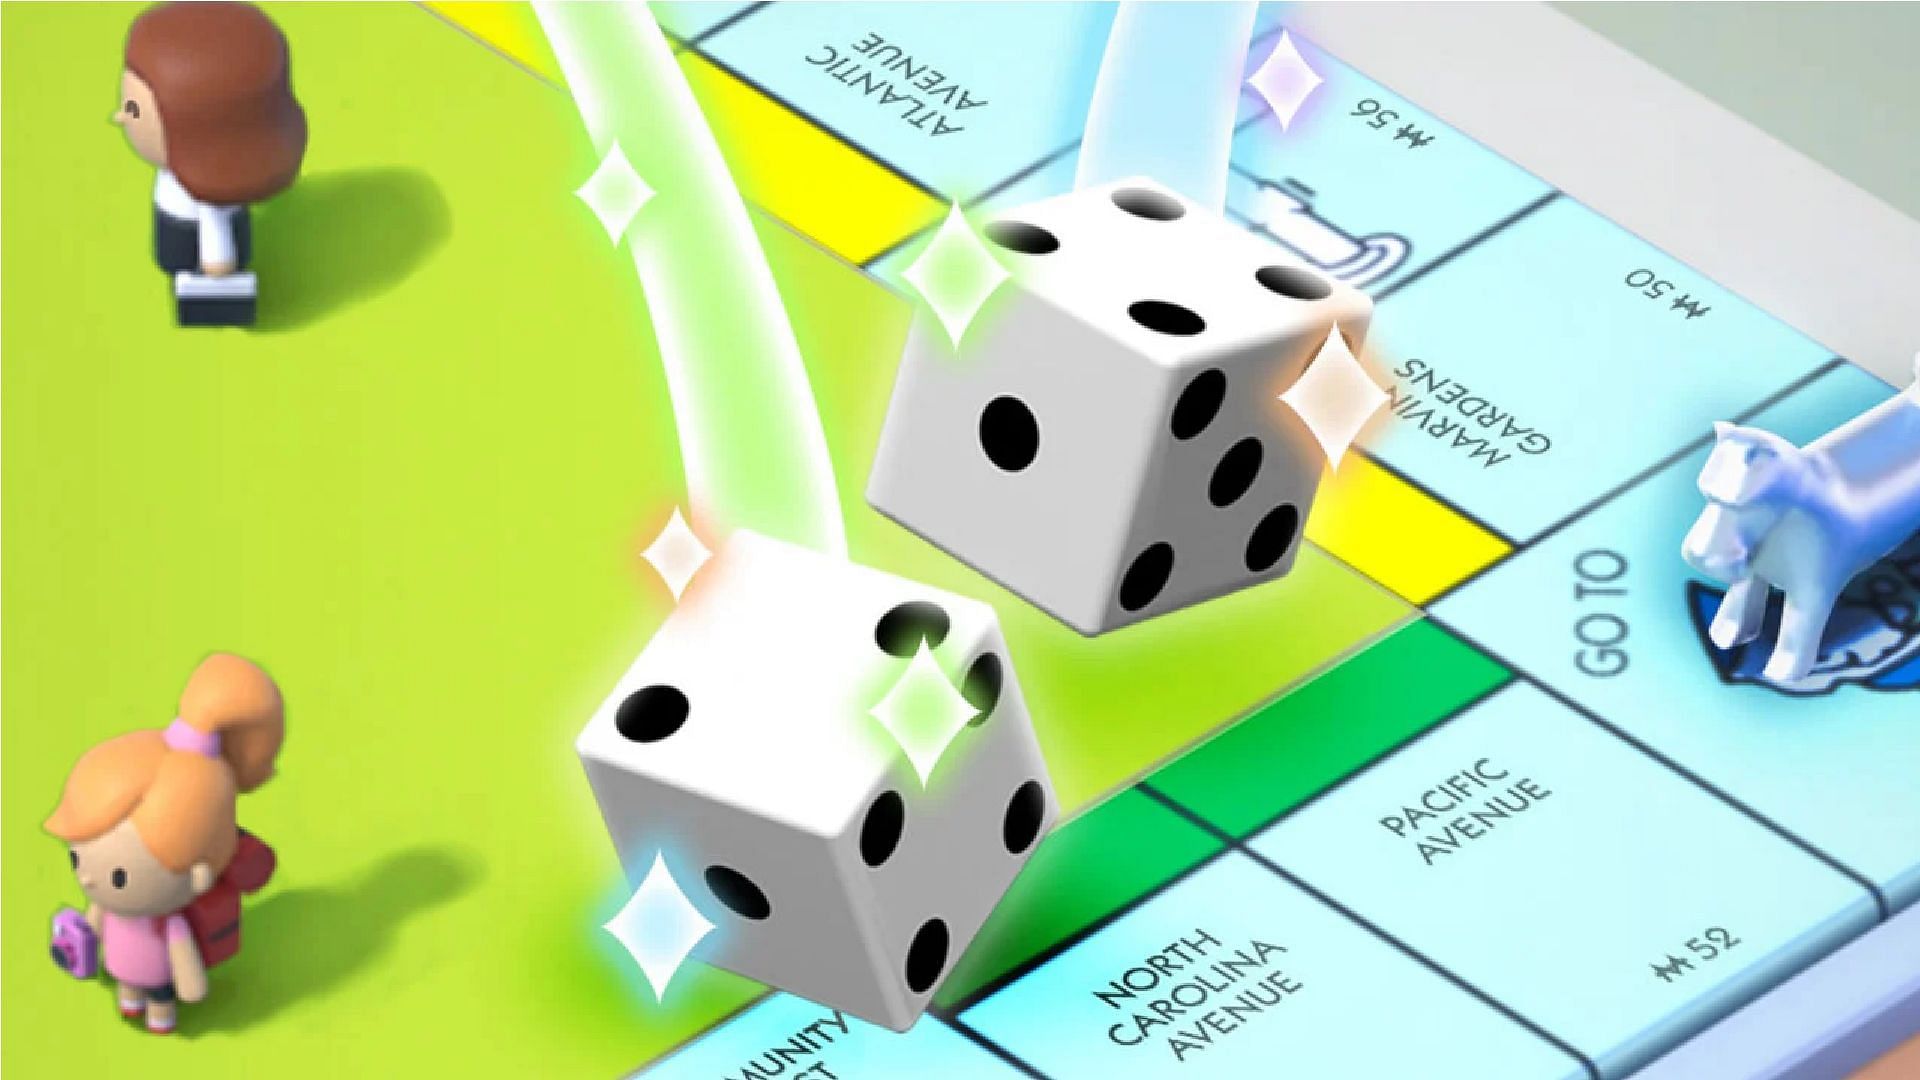 roll your dice to earn money (Image via Scopely)